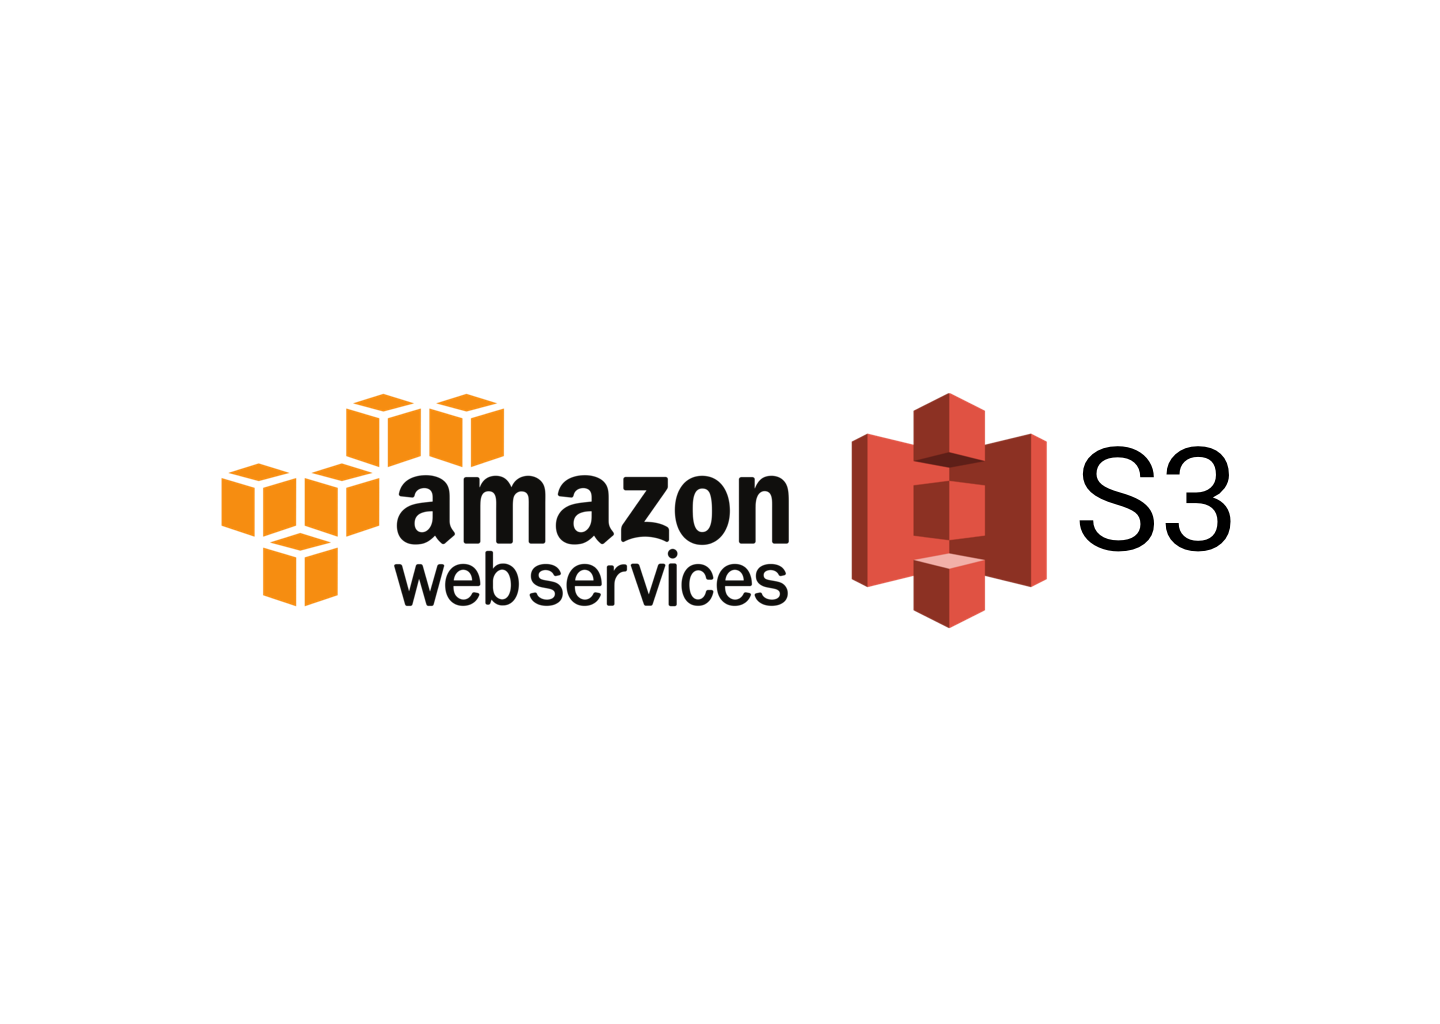 How to configure aws S3, so the objects can only be accessible from my Domain and block access from a third party website